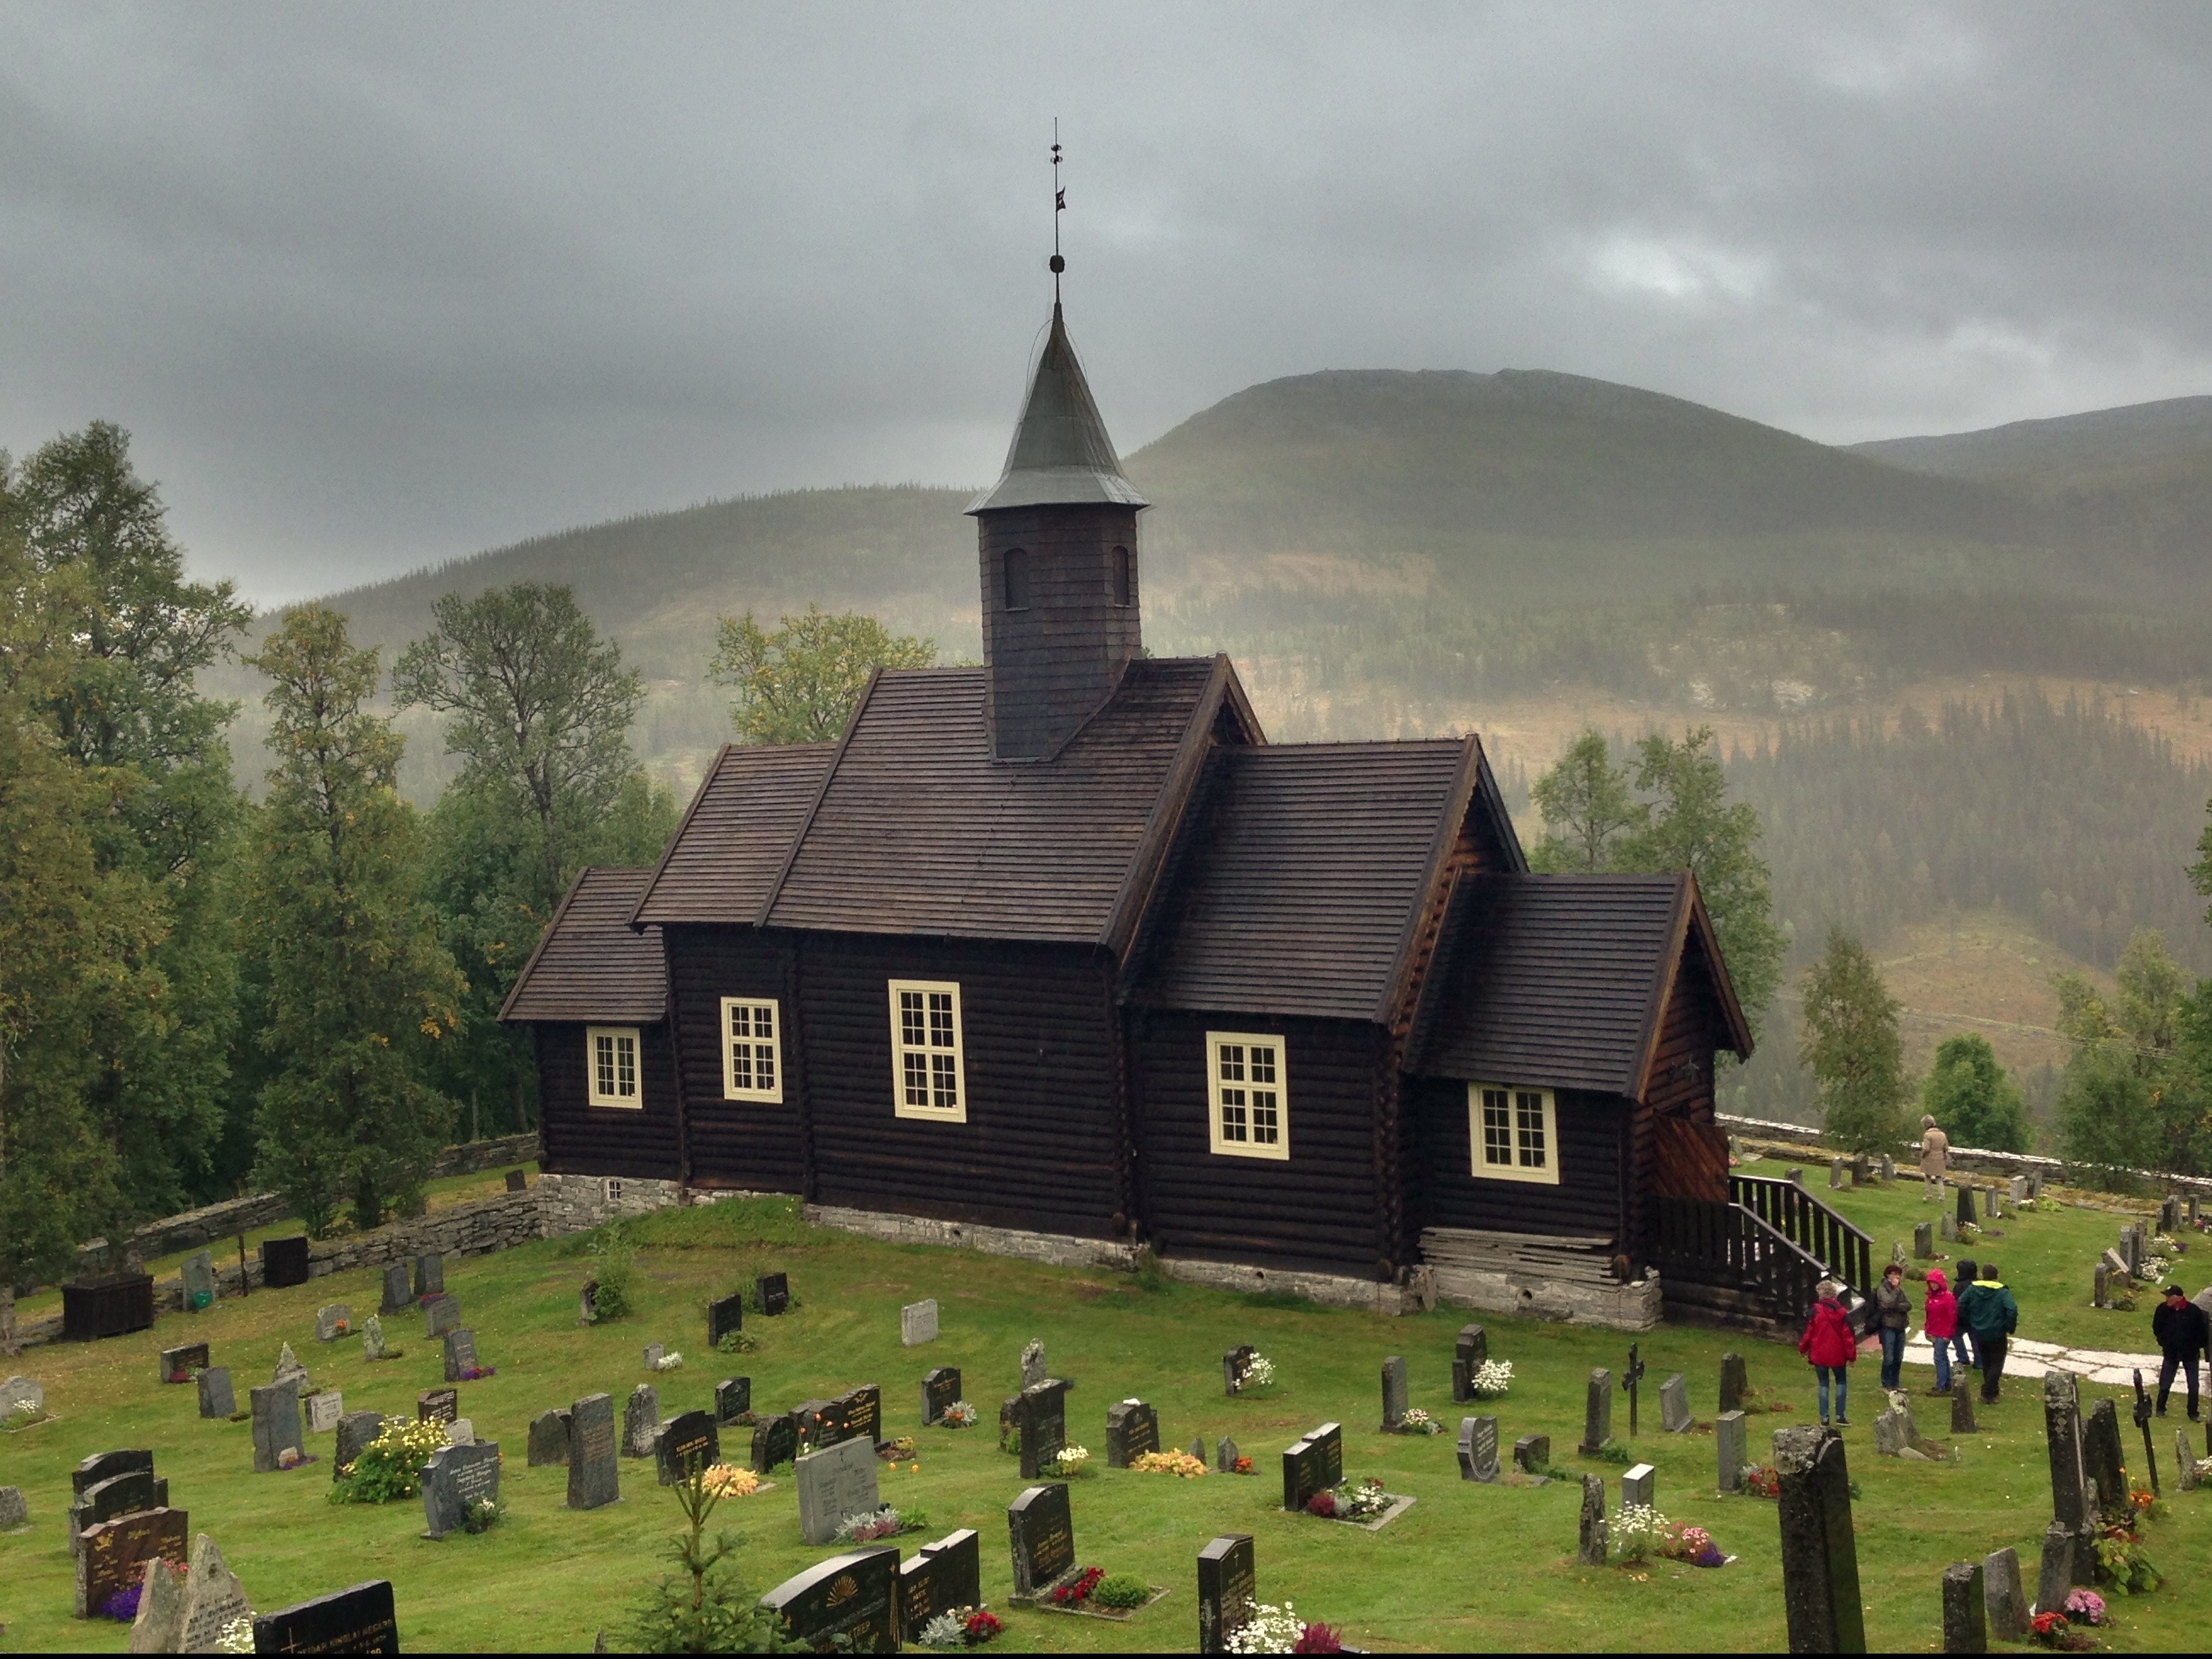 black church in middle of cemetery during cloudy daytime